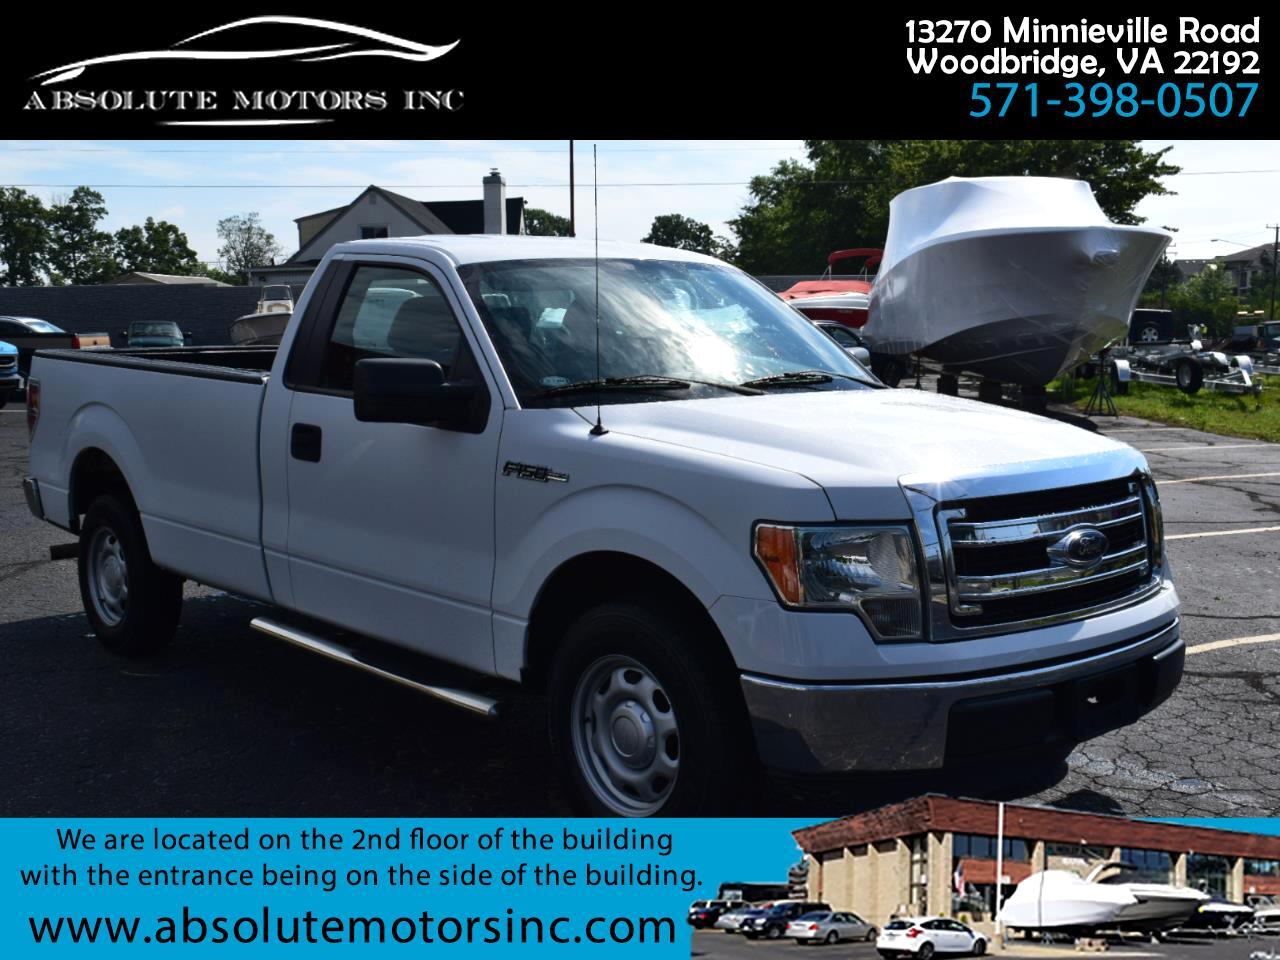 Ford F-150 XL 8-ft. Bed 2WD 2014